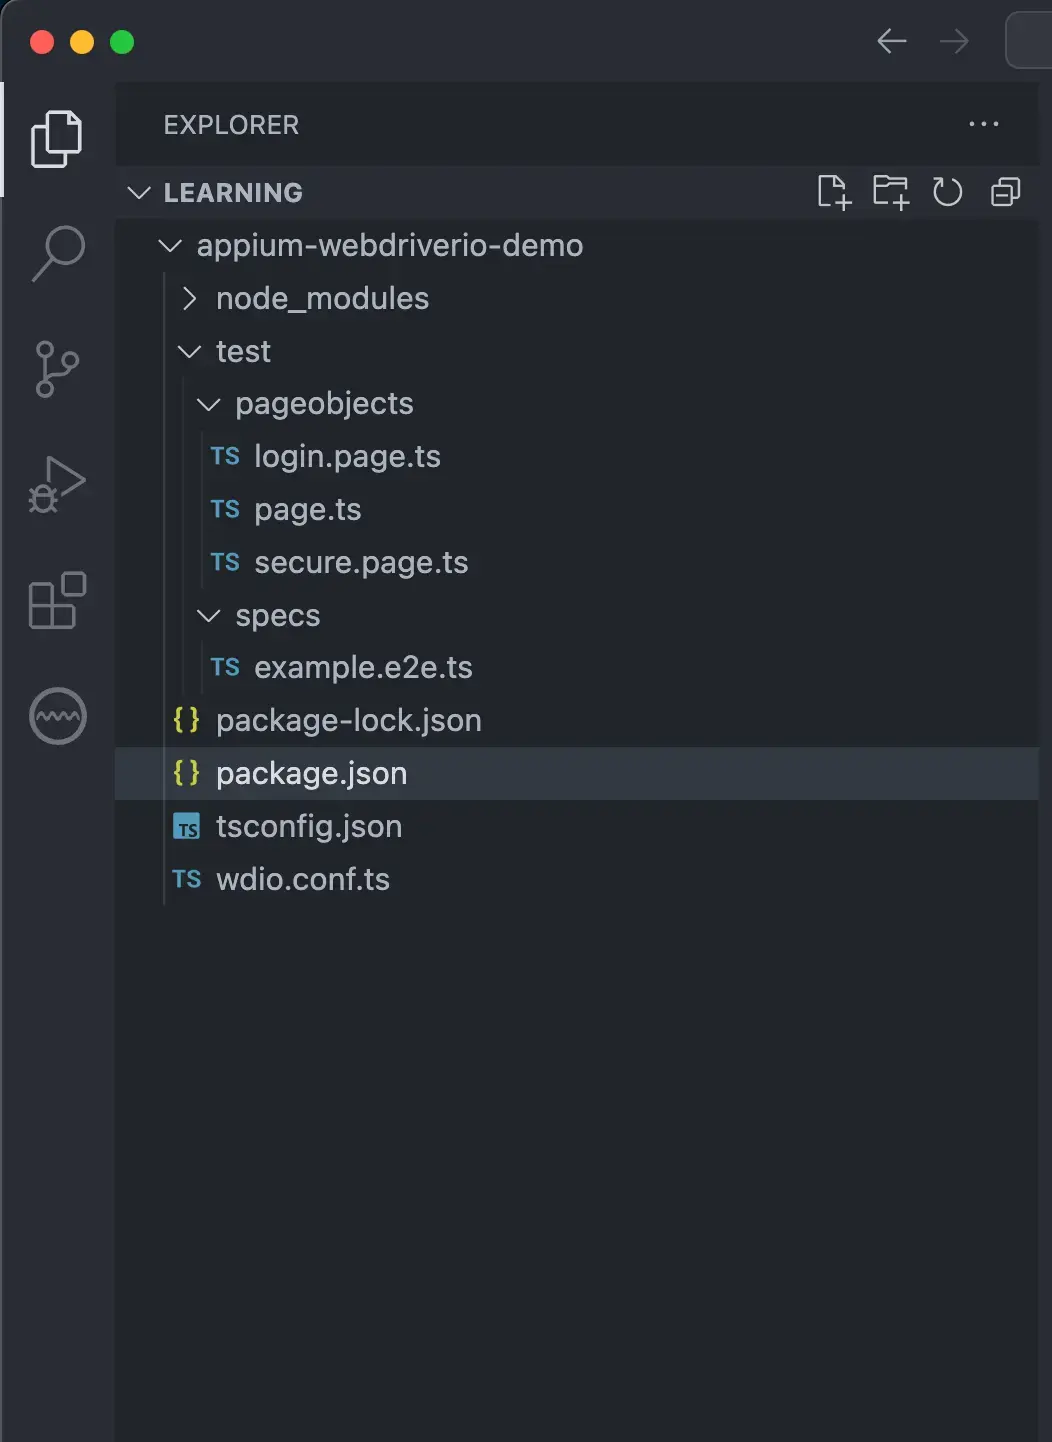 sample tests and page object folders can be deleted